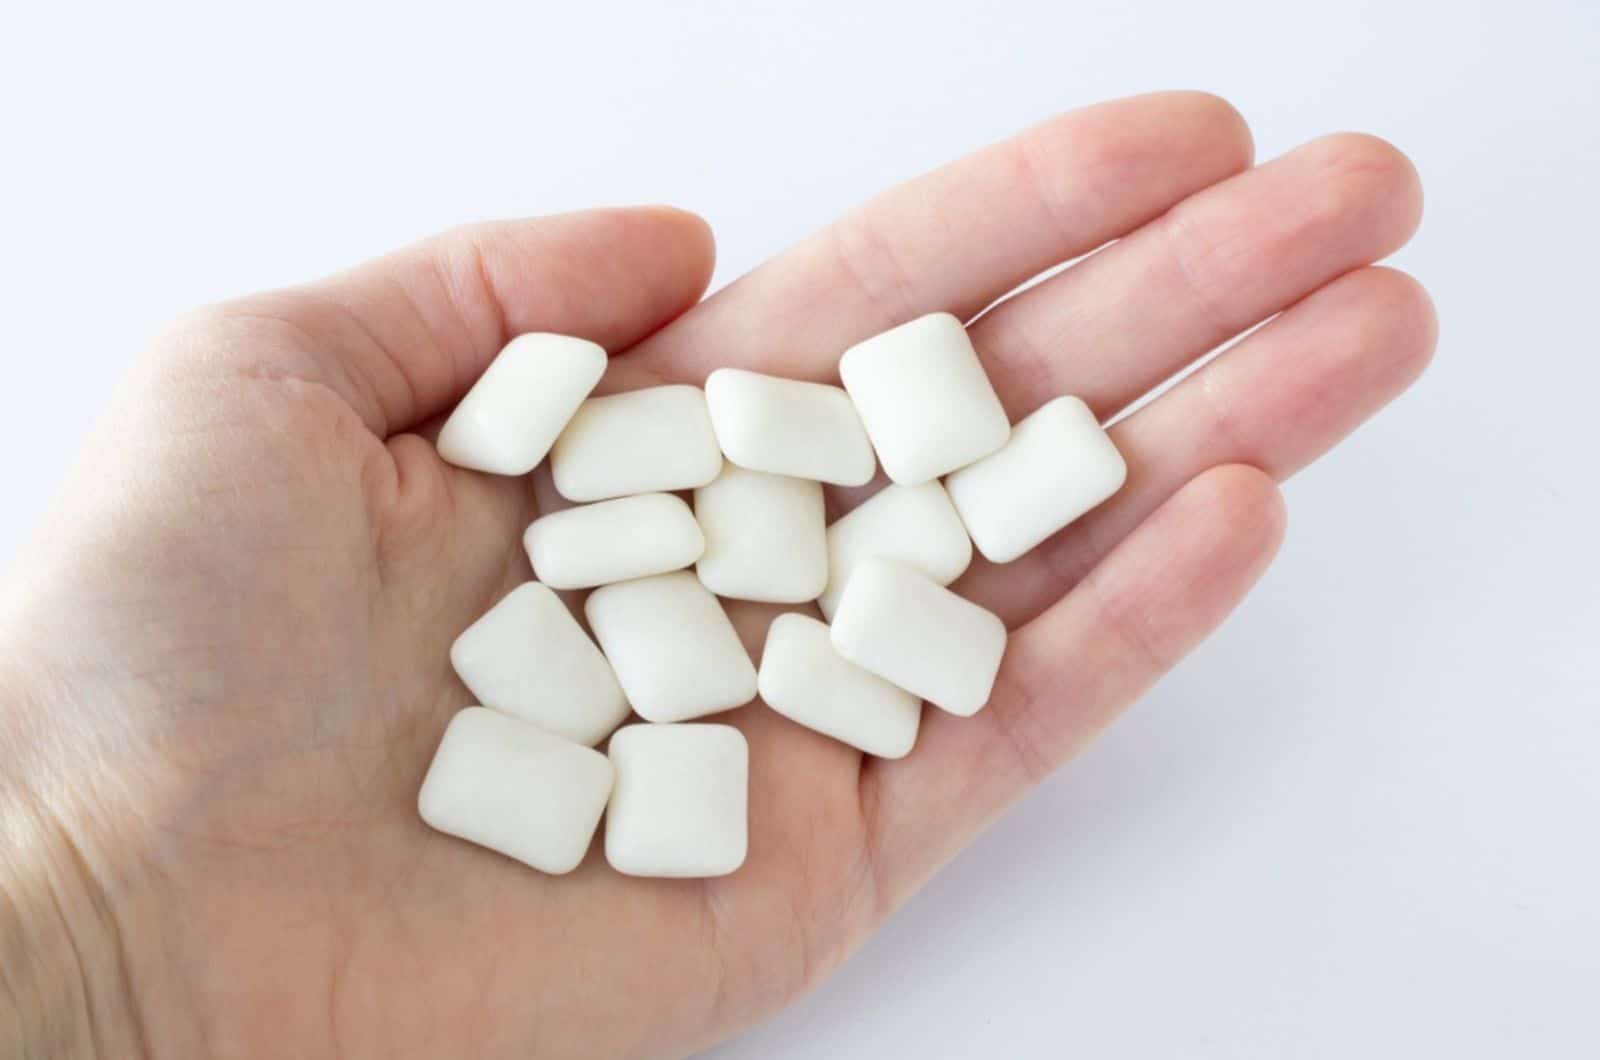 sugar-free xylitol gum for teeth in a woman's hand